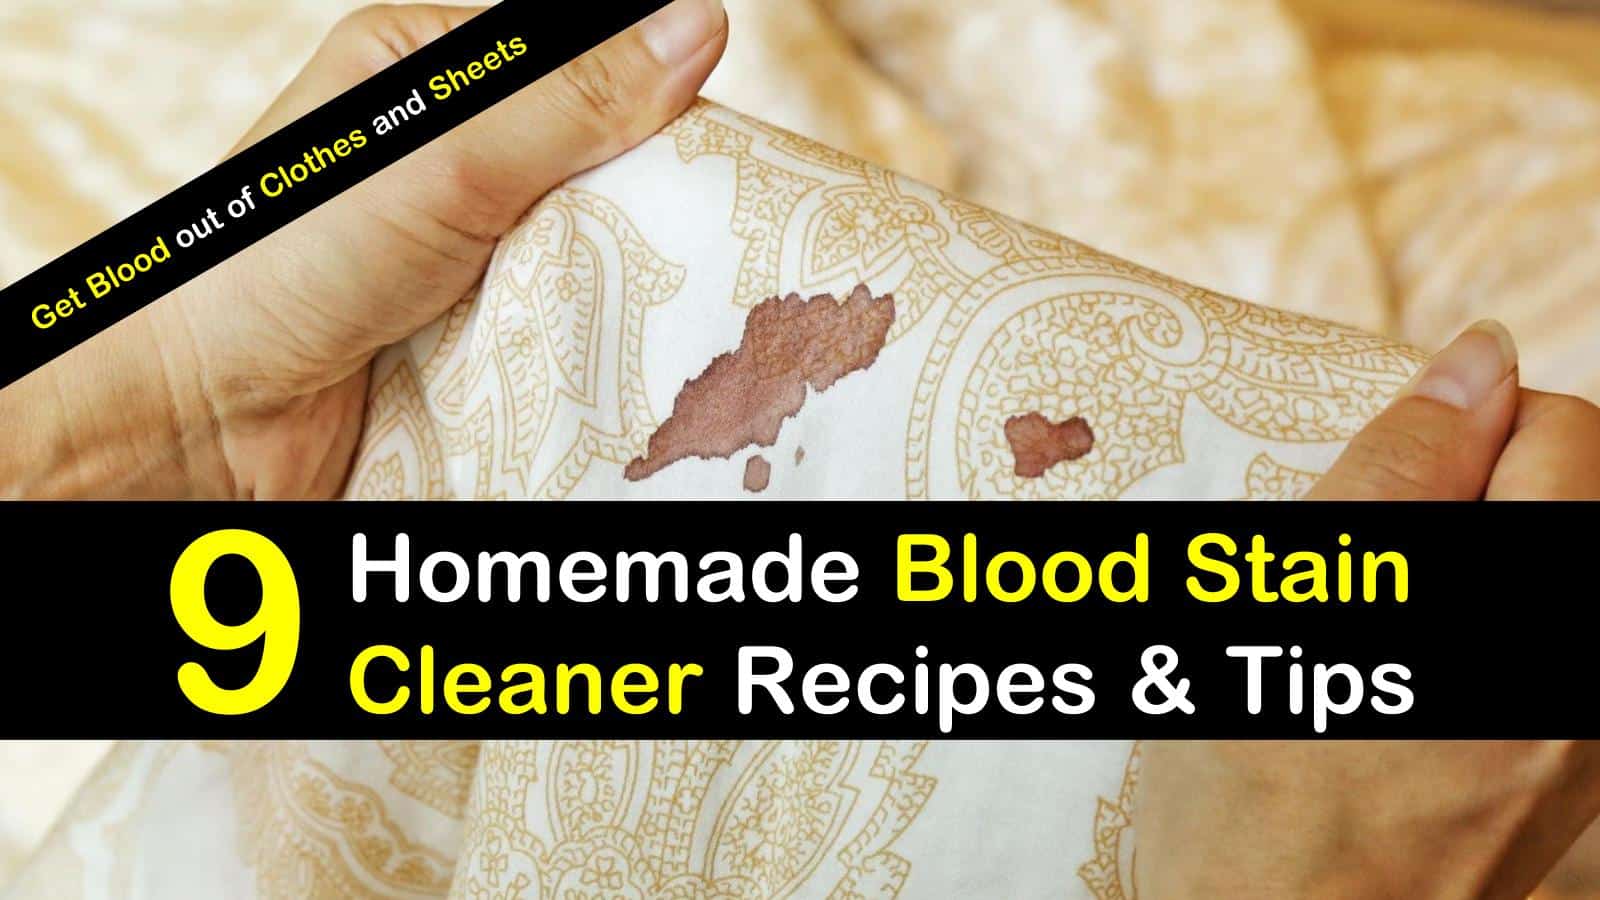 9 Homemade Blood Stain Cleaner Recipes and Tips